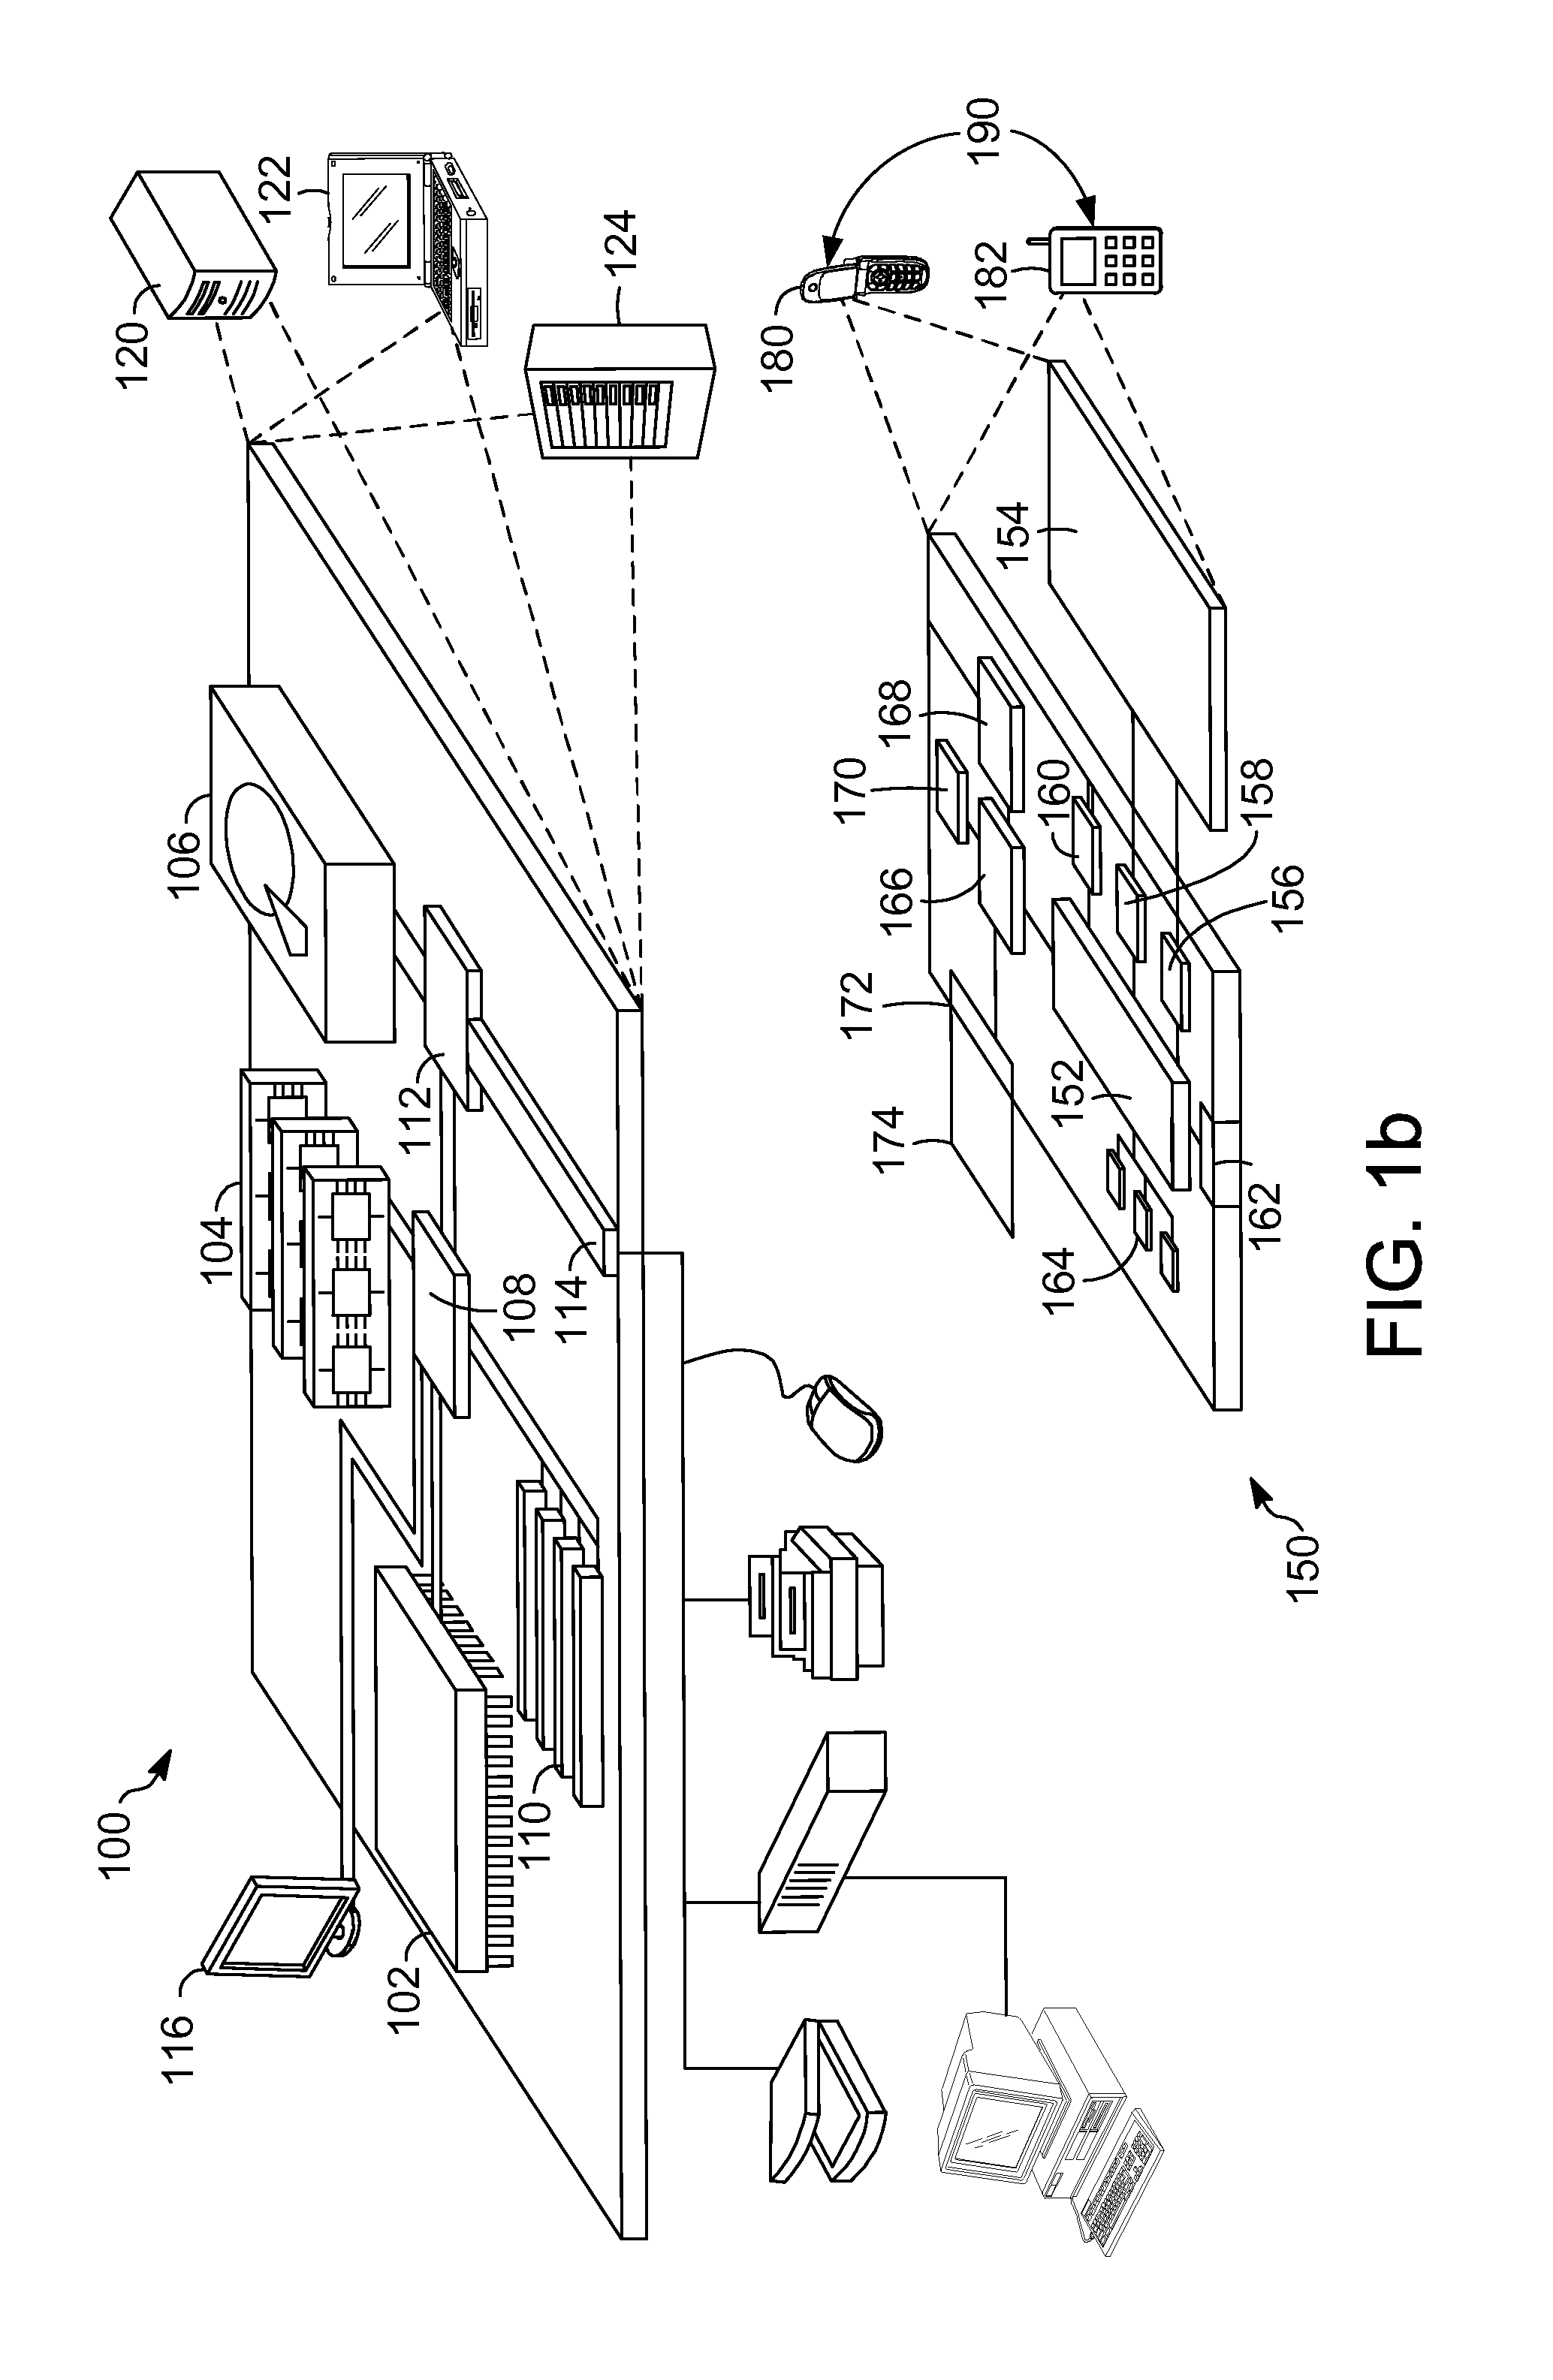 Systems and Methods For Managing The Toilet Training Process Of A Child